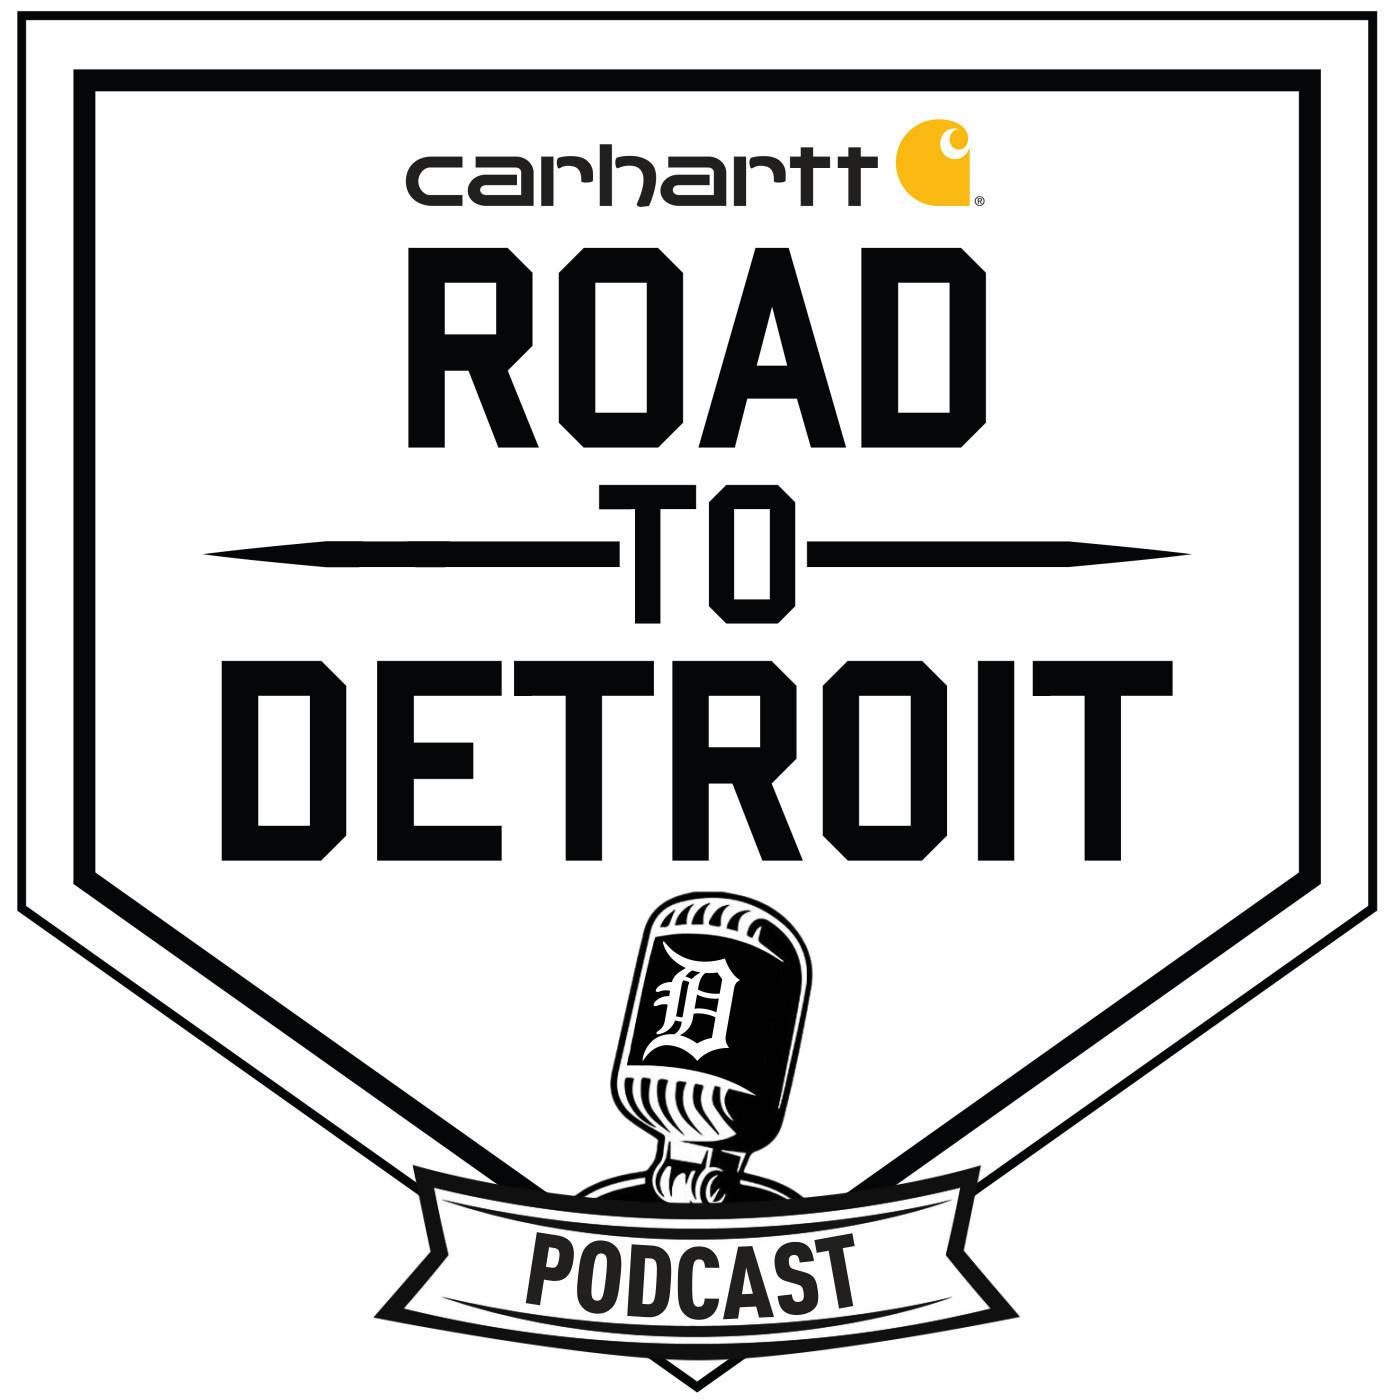 Road To Detroit presented by Carhartt Episode 7: The Man From Everywhere